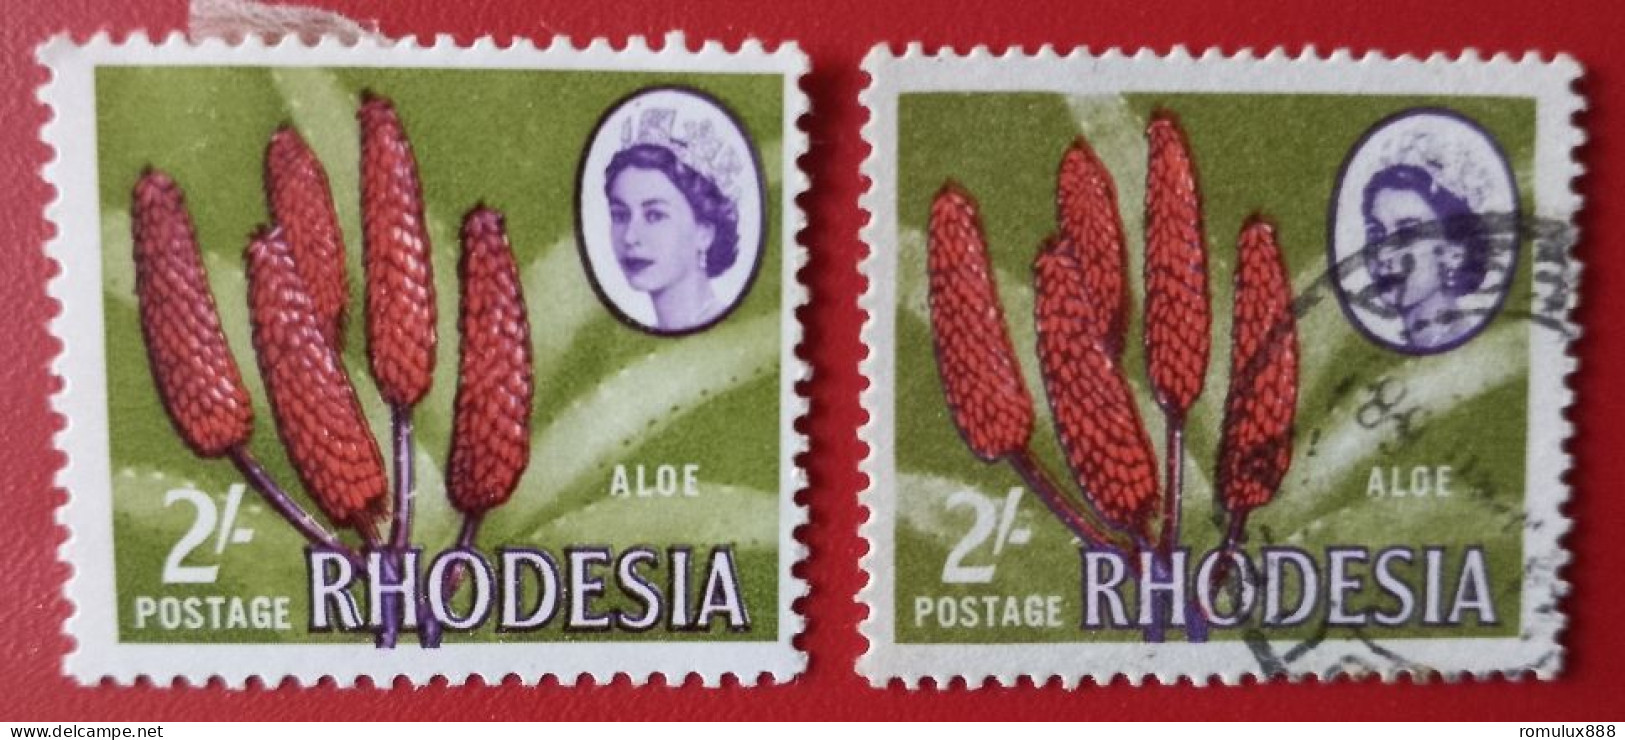 RHODESIA SACC 140-2 SHILLINGS X2 MH/USE WITH FLAW SHIFT OF FLOWER INTO MARGINS - Rhodésie (1964-1980)